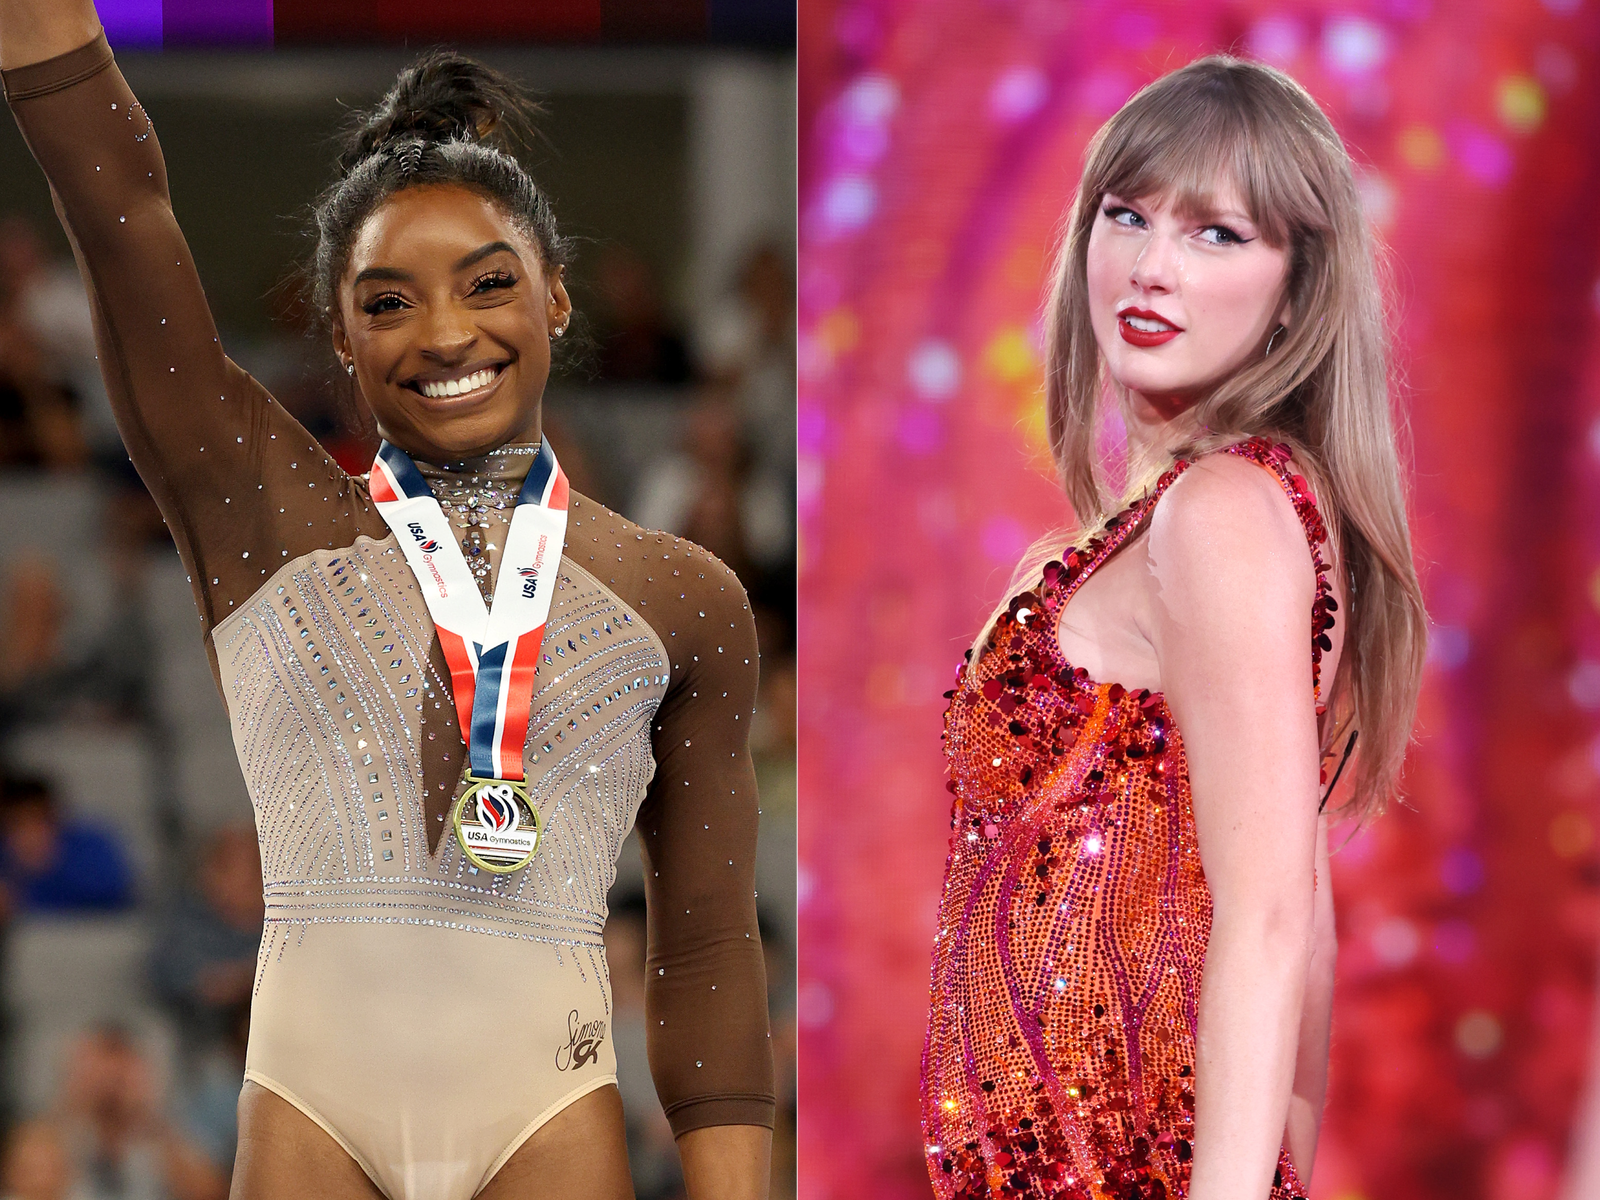 Simone Biles Has Taylor Swift's Full Support After Using 'Ready For It' For Her Jaw-Dropping Floor Routine